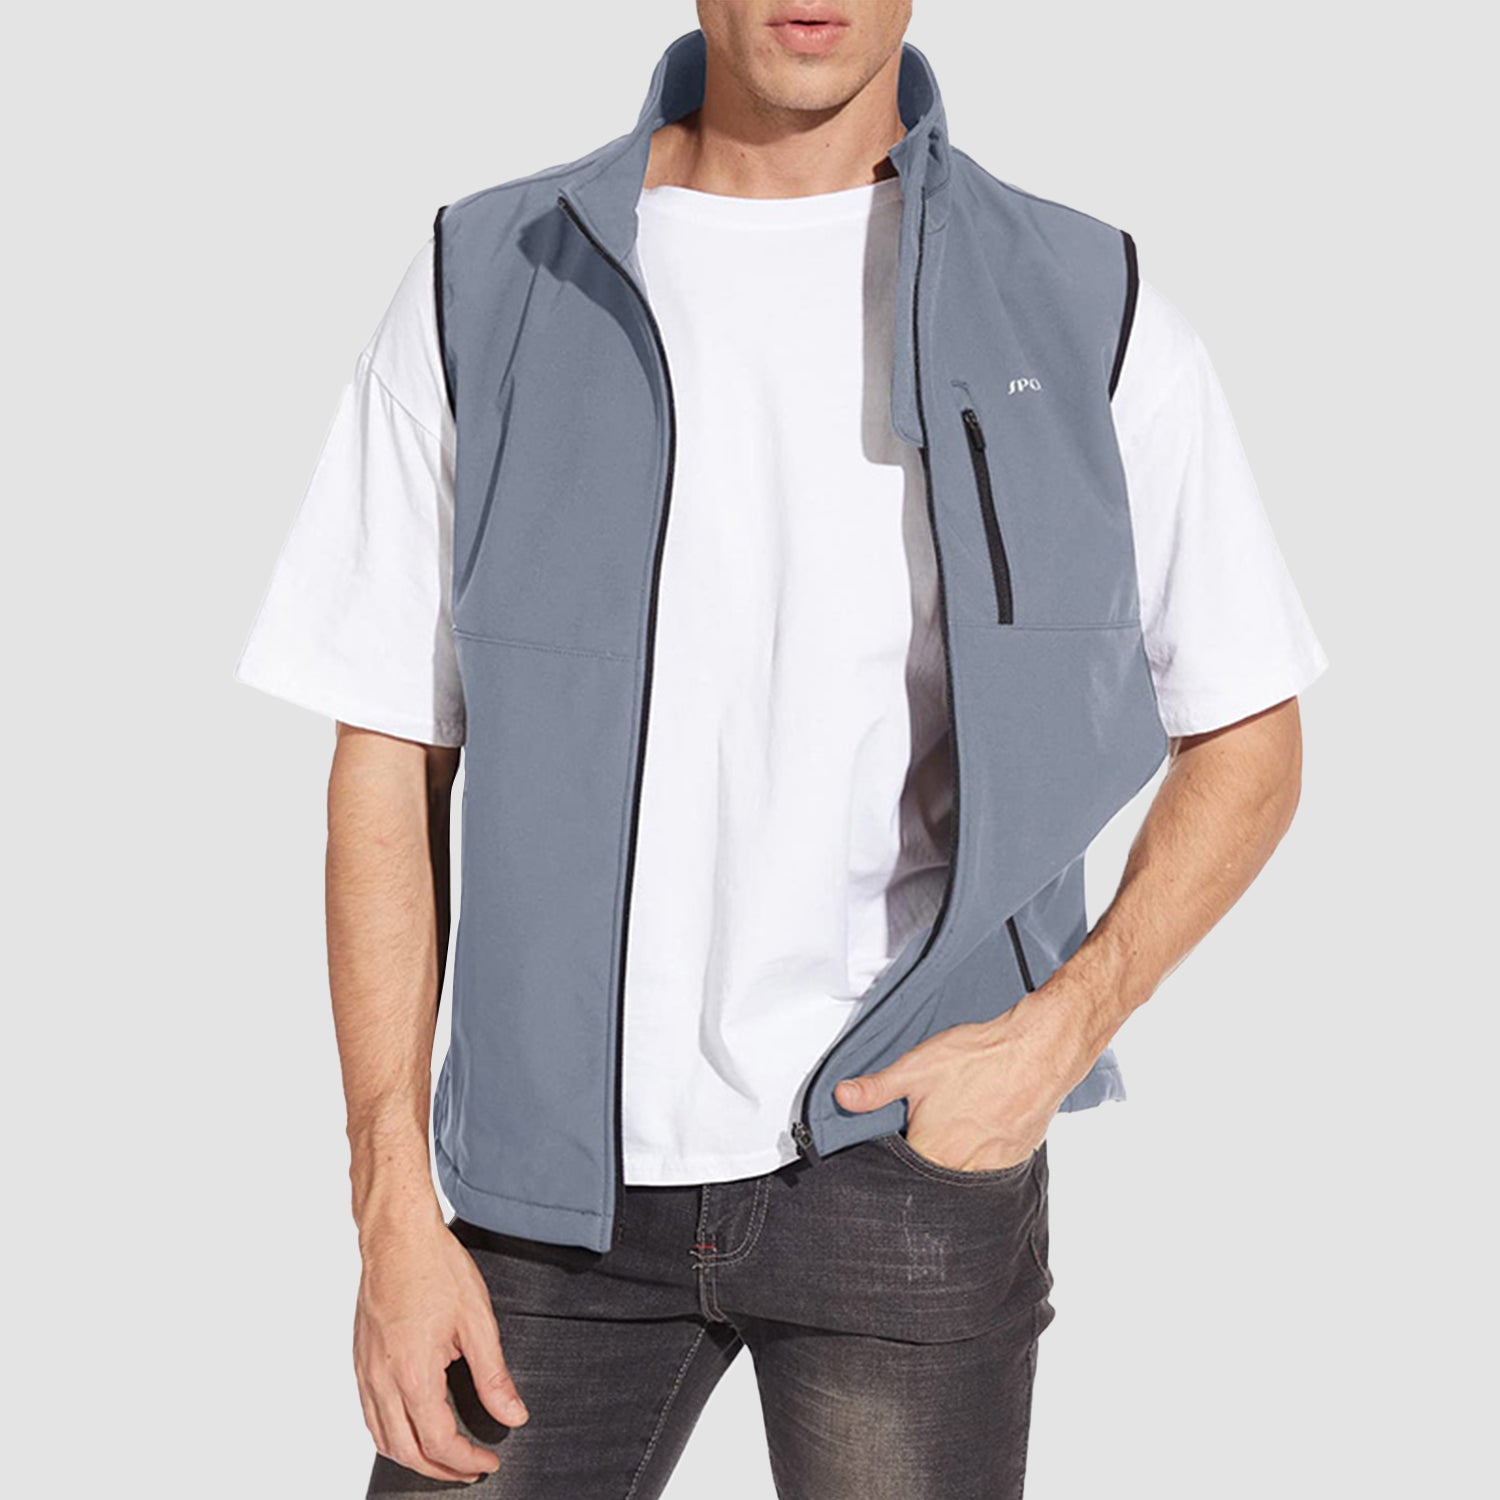 Frontwalk Men Sleeveless Vest Winter Warm Quilted Coats Full Zip Sleeveless  Padded Jackets with Pocket for Outdoor Work Business